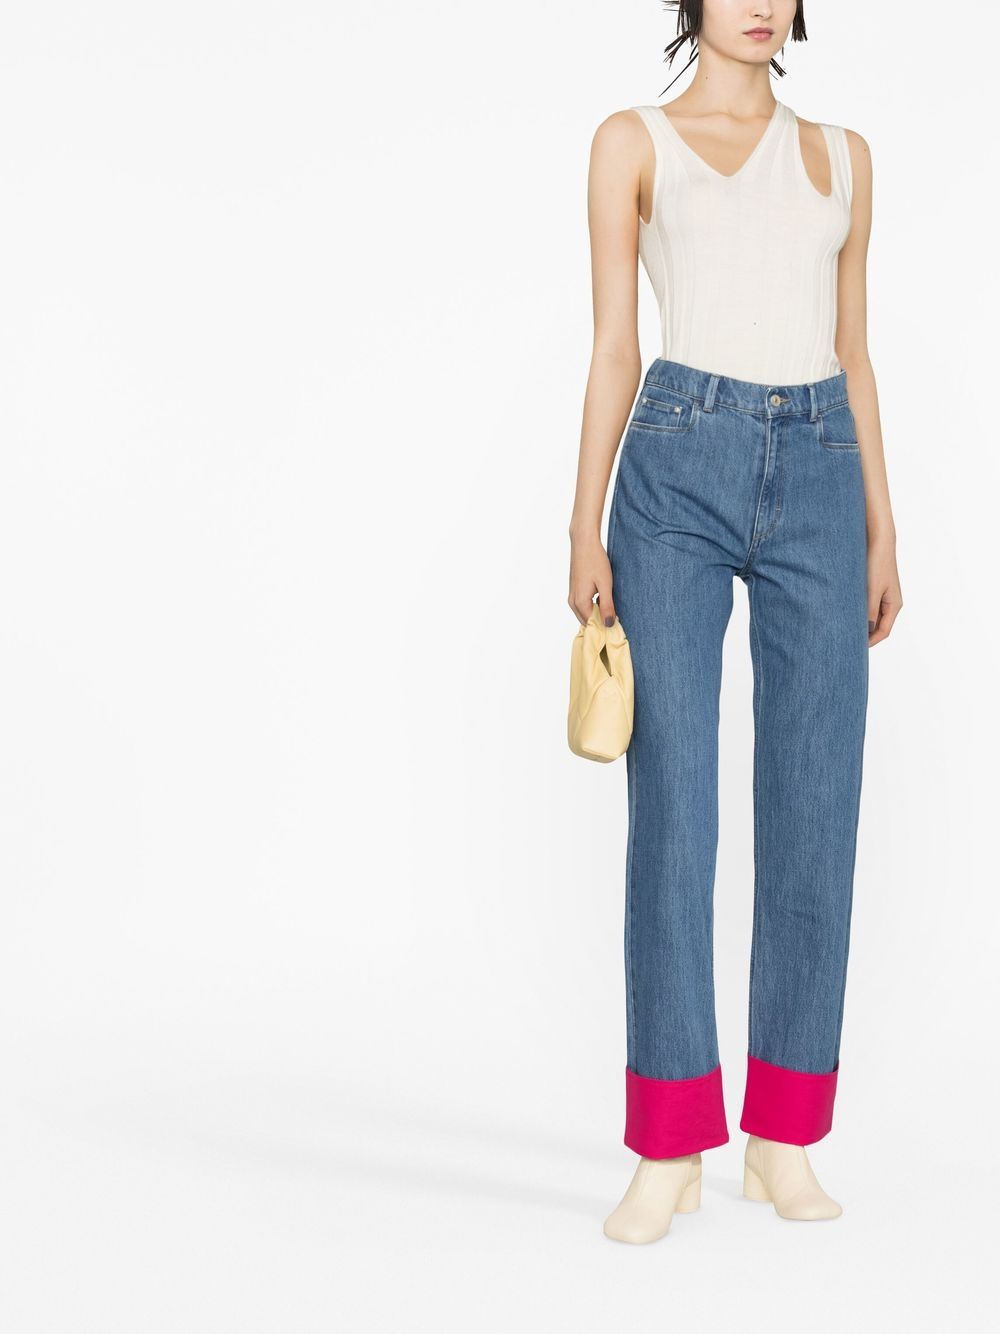 Wandler + Poppy Contrasting Cuff Jeans